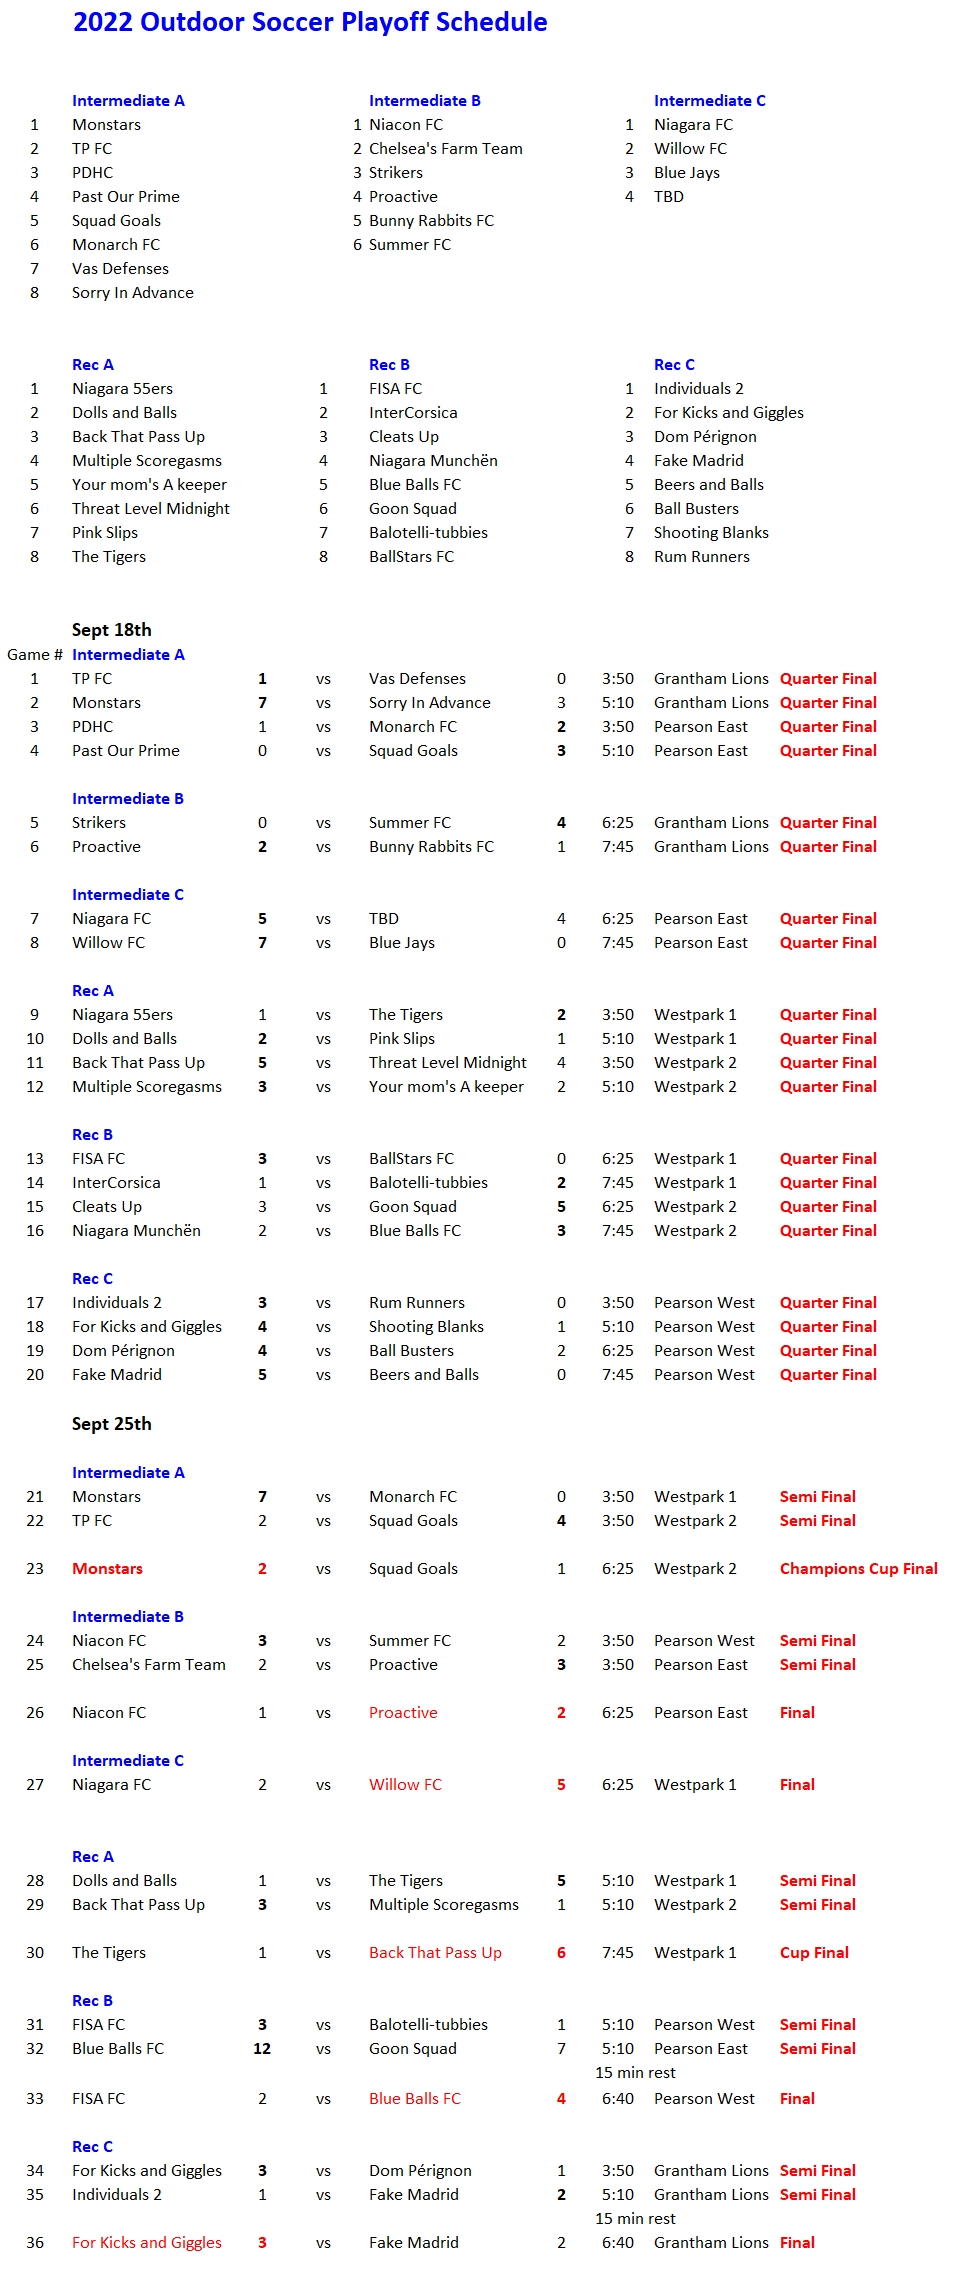 NRS 2022 Outdoor Soccer Playoff Schedule Final